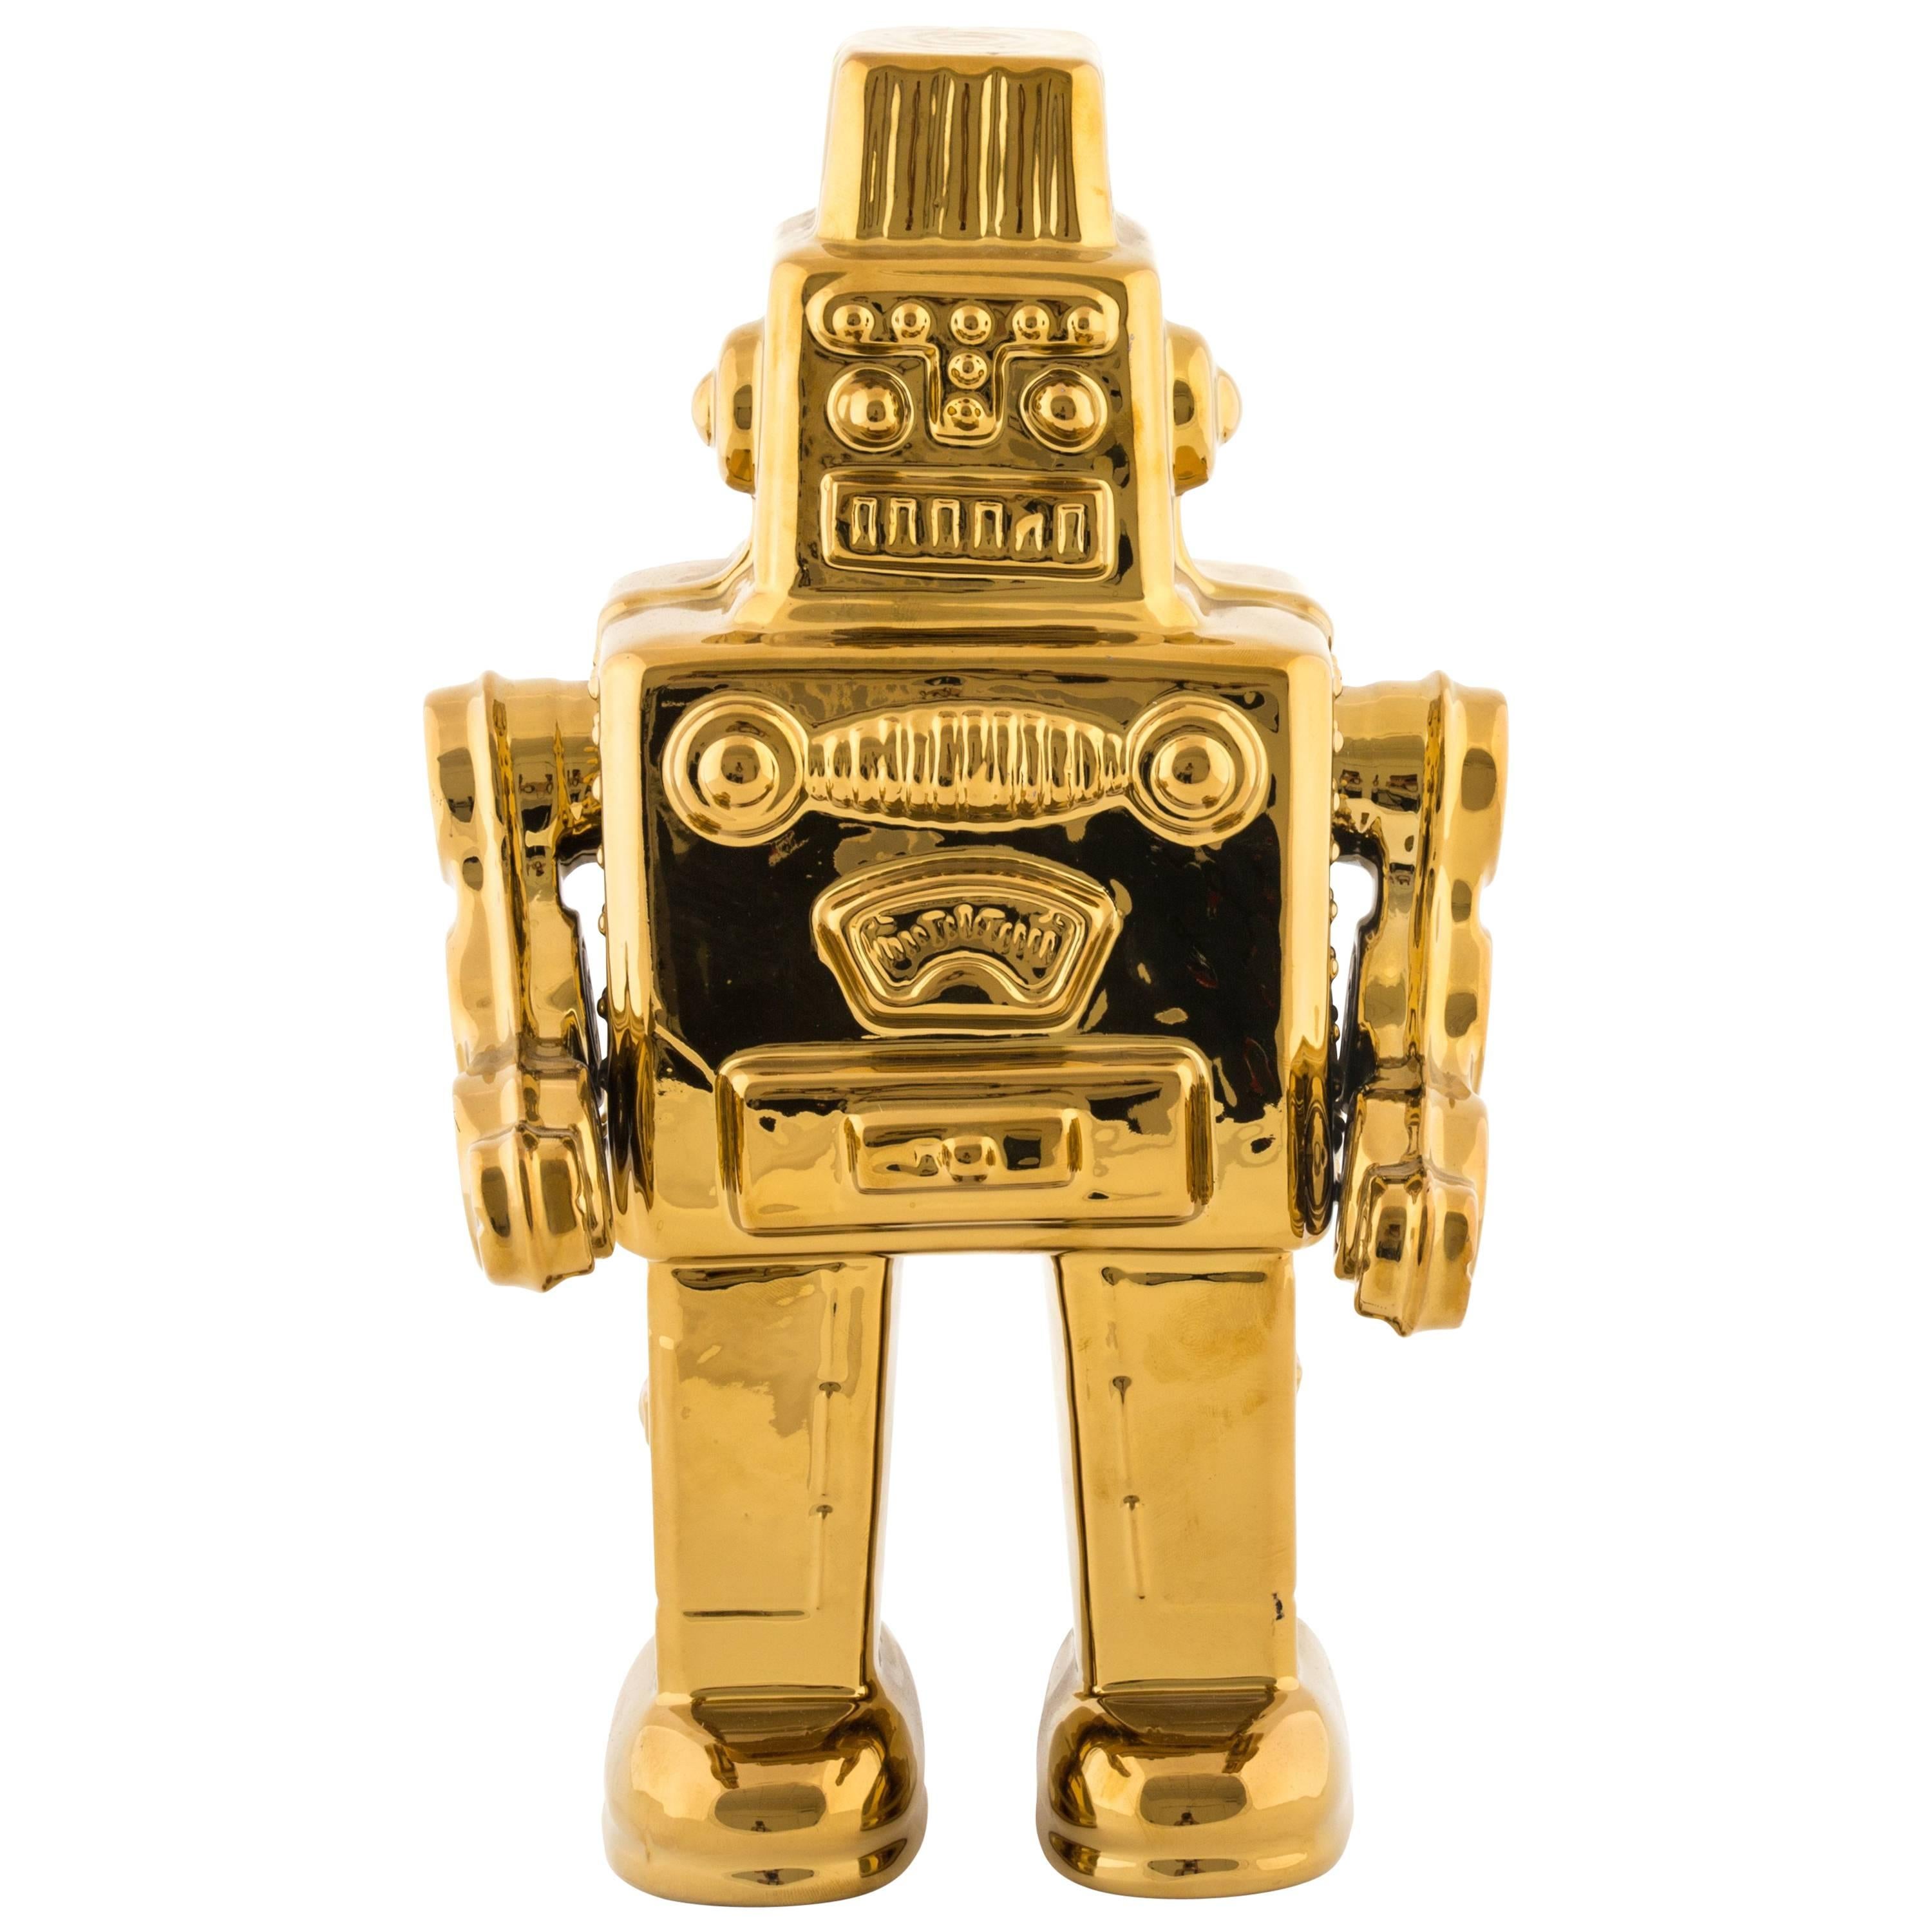 Seletti "Limited Gold Edition" Porcelain My Robot For Sale